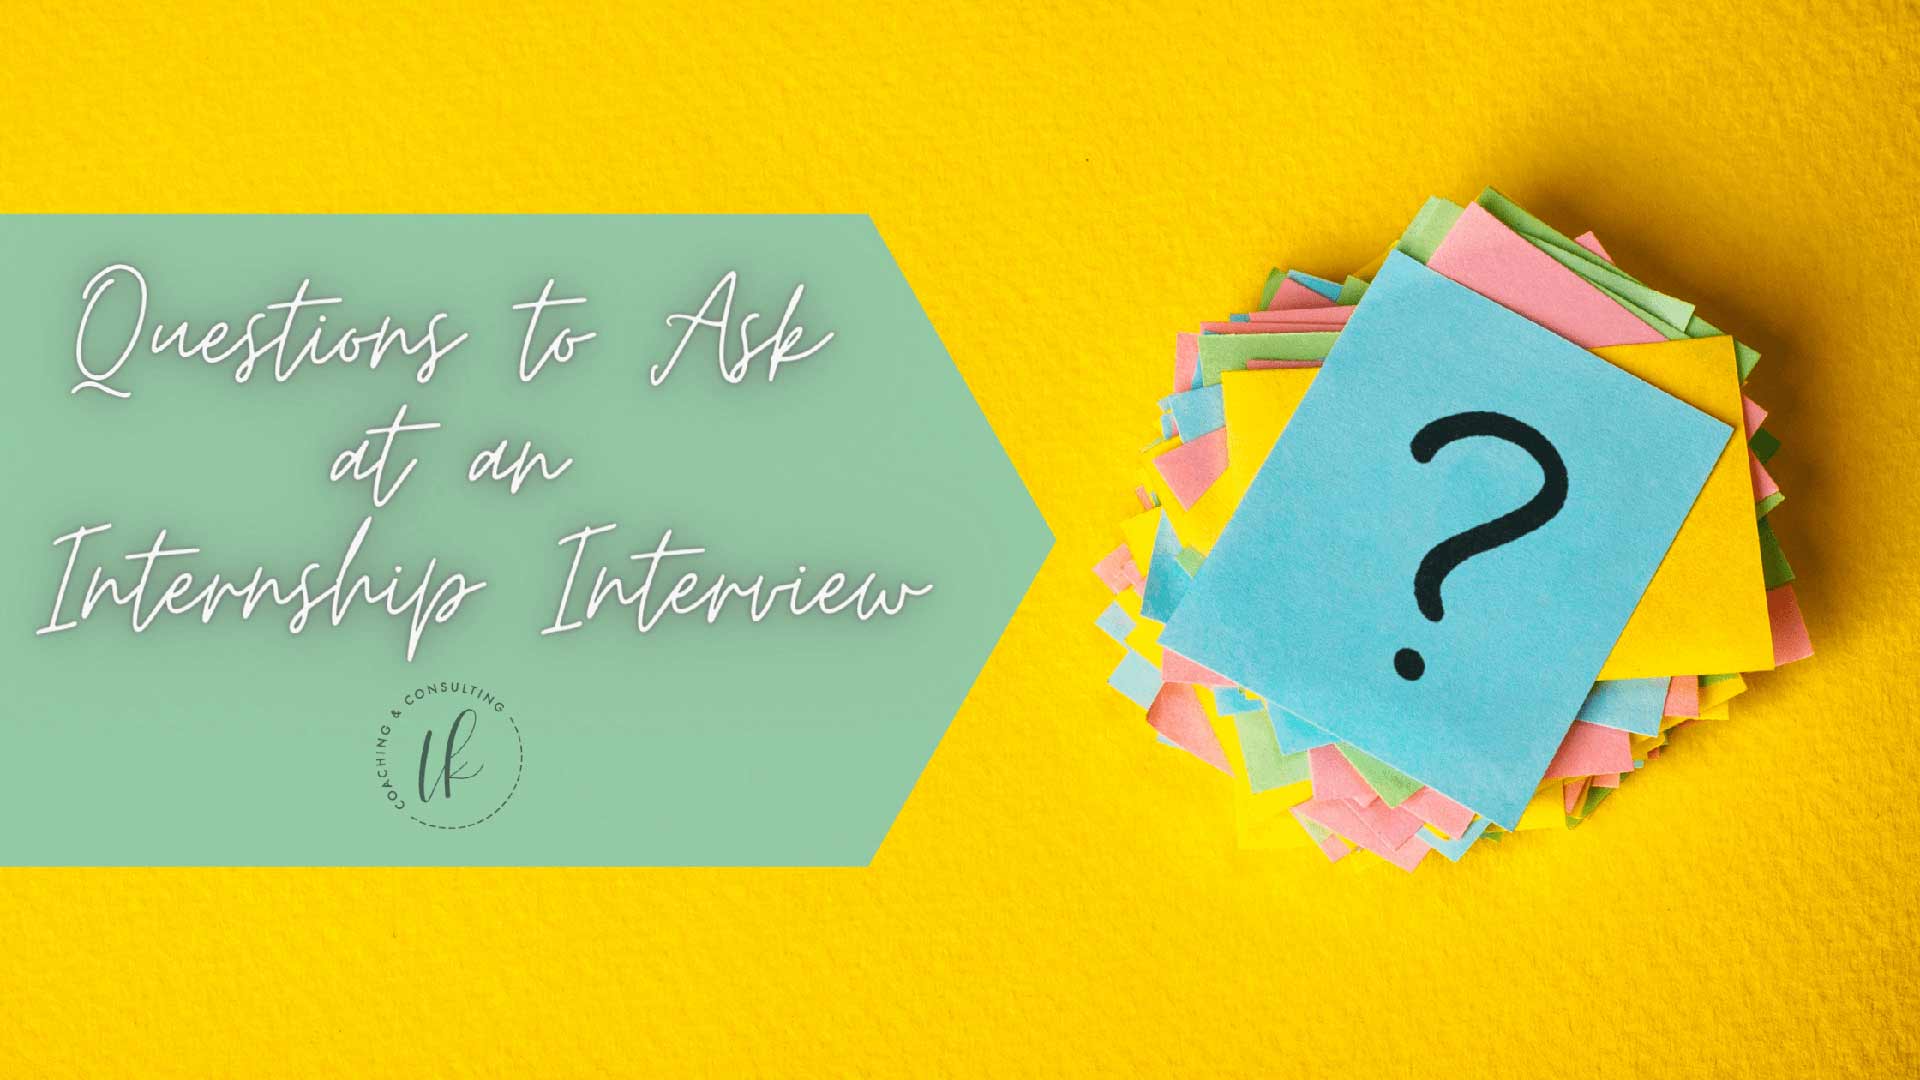 You are currently viewing Questions to Ask at an Internship Interview